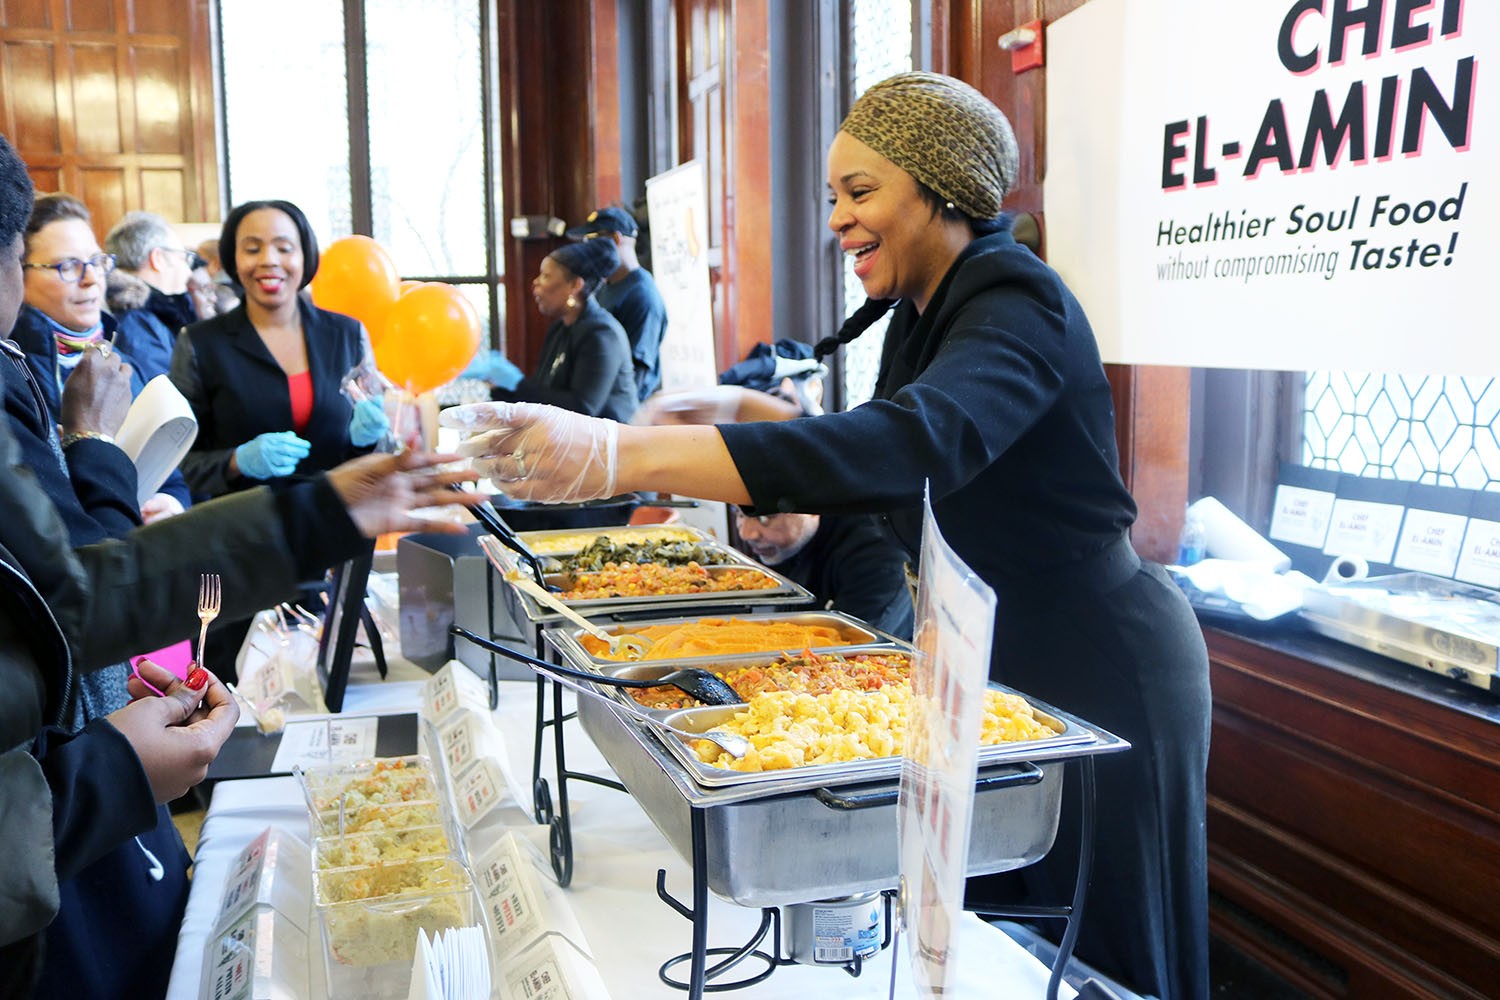 A person hands out samples of their soul food to potential customers at the Harlem Buyer Fair.